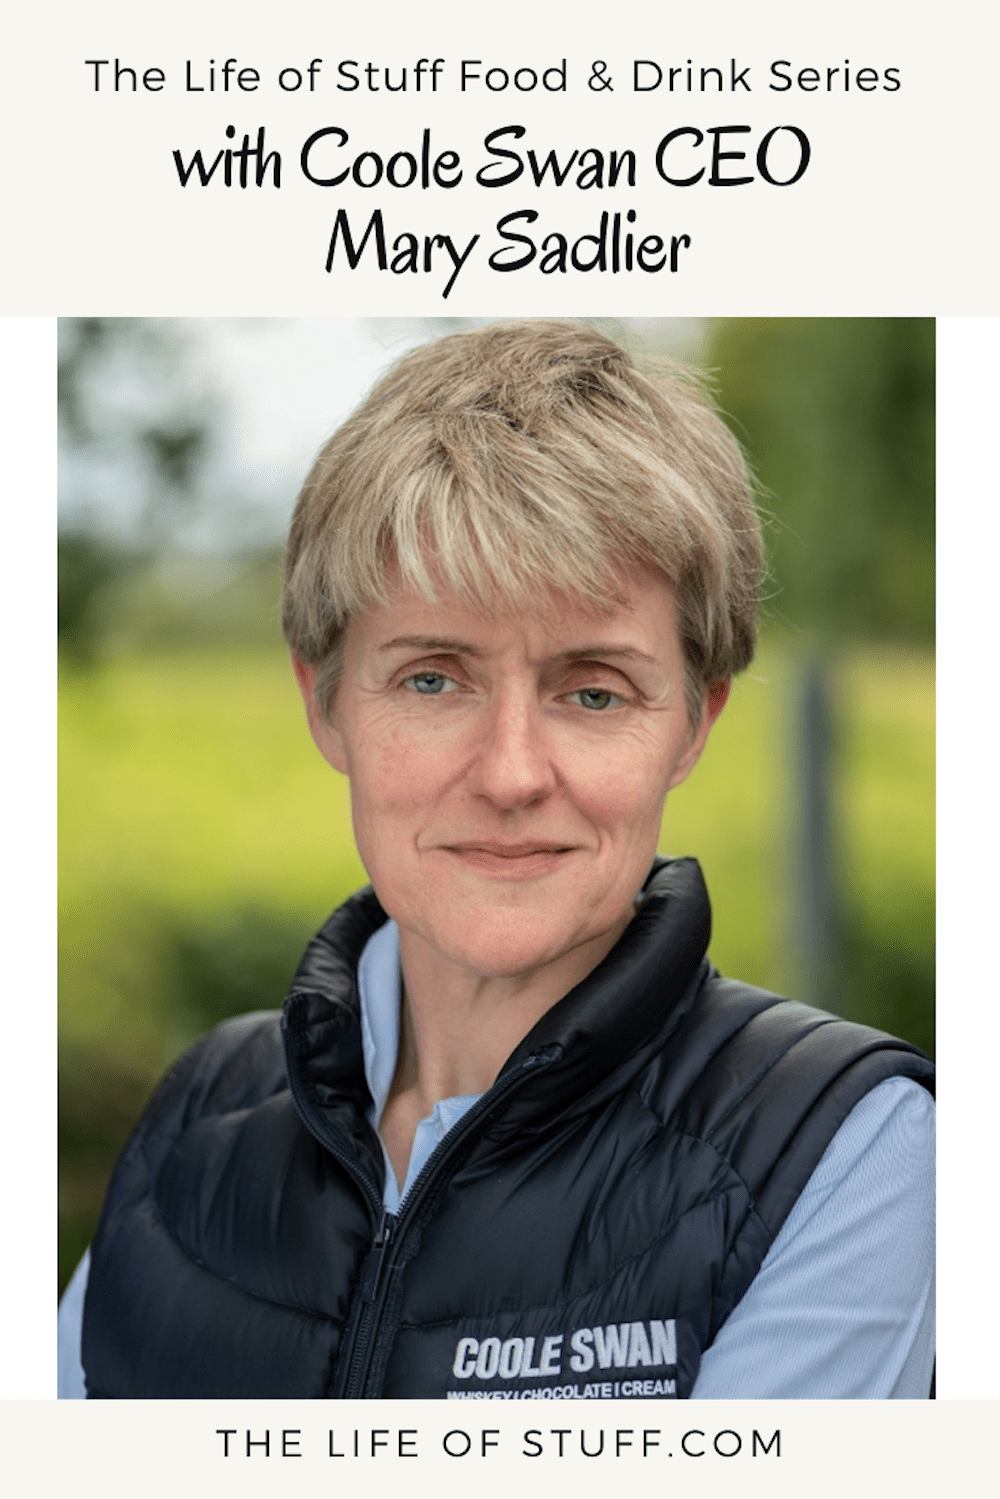 The Food & Drink Series – with Mary Sadlier, CEO of Coole Swan - The Life of Stuff